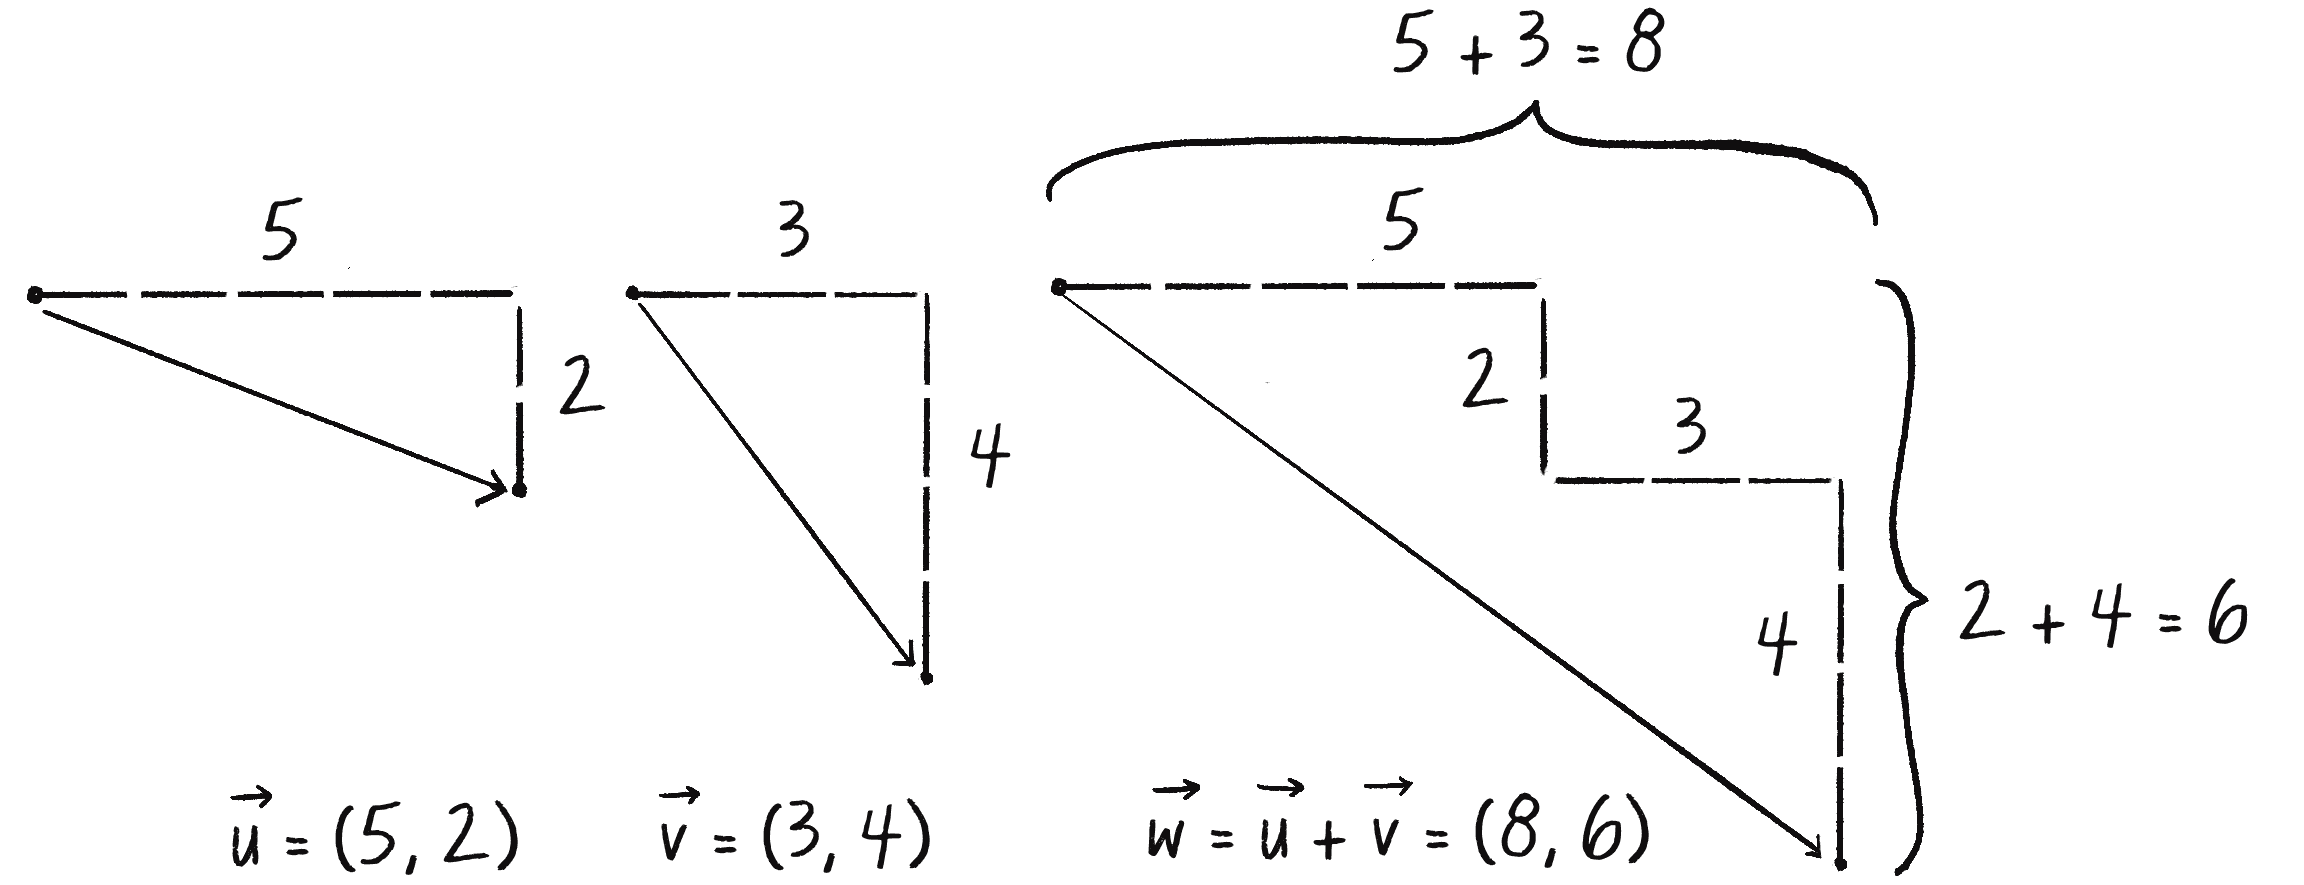 Figure 1.6: Adding vectors by combining the x- and y-components